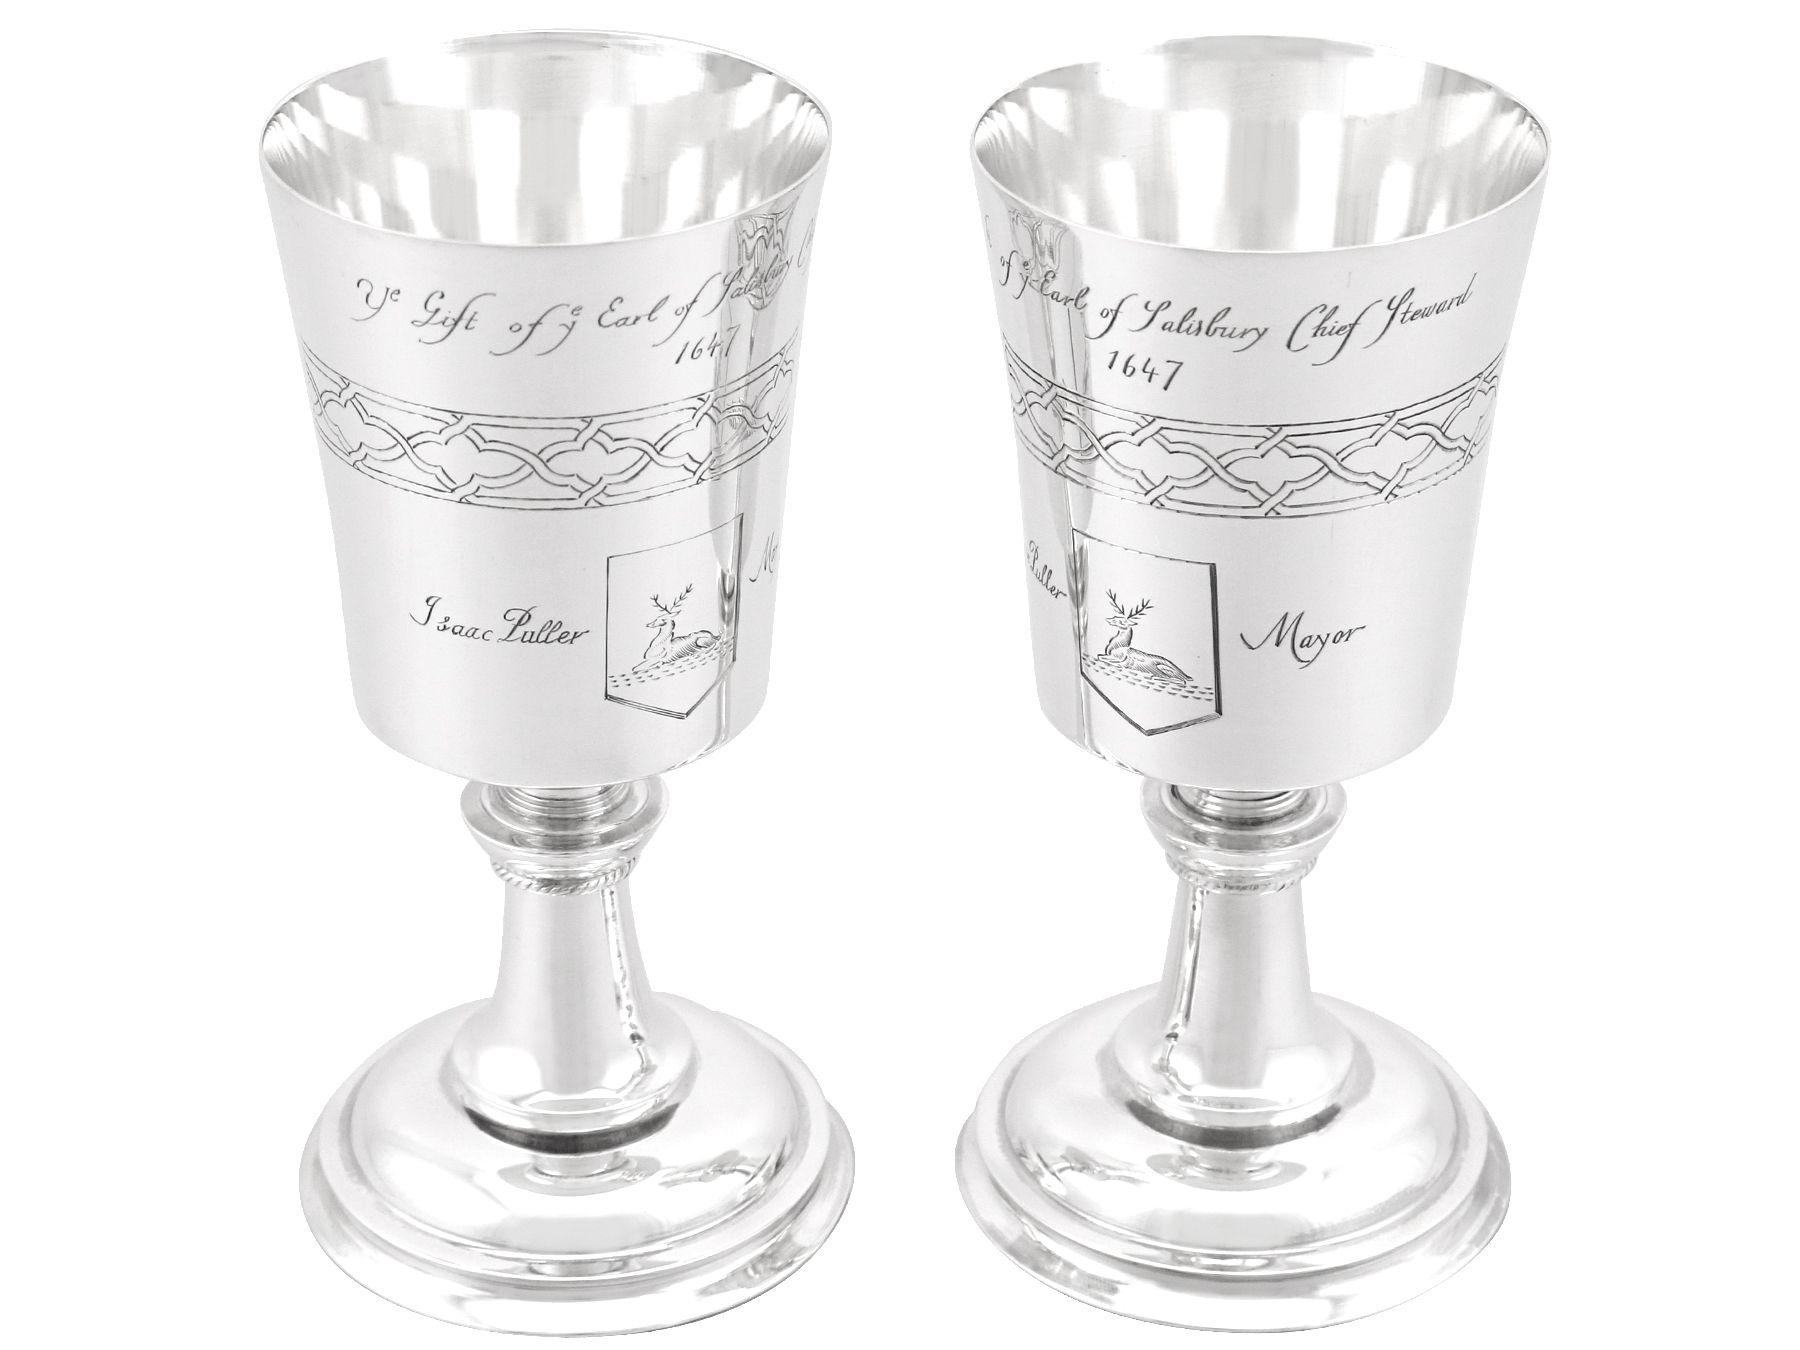 An exceptional, fine and impressive pair of vintage English sterling silver chalices; an addition to our collectable range of silverware.

These exceptional vintage sterling silver chalices have been modelled in the form of 17th century